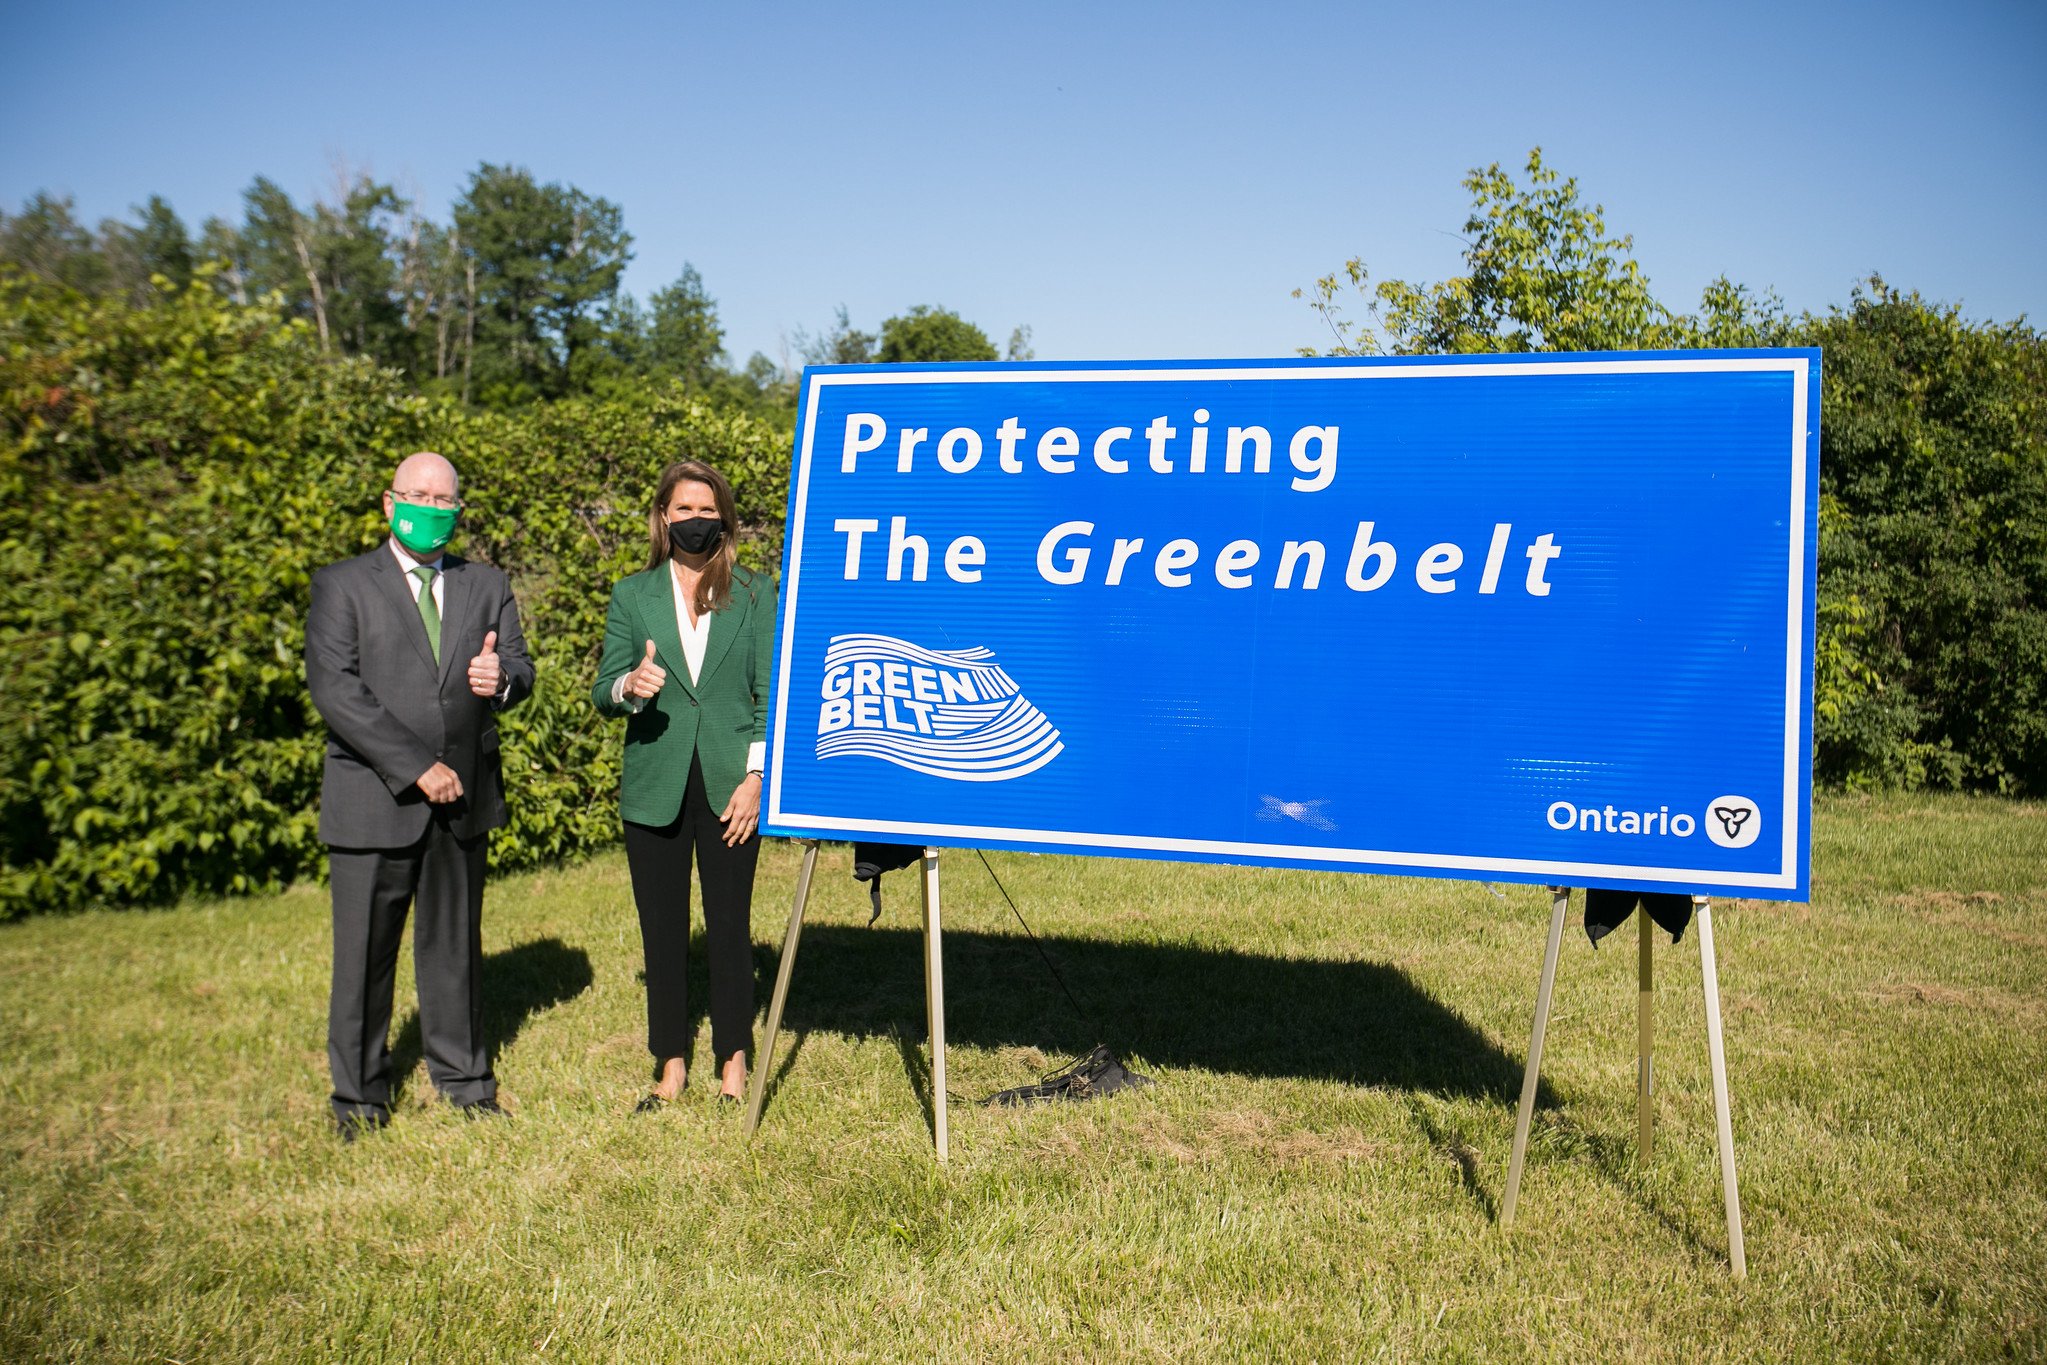 Ontario Municipal Affairs Minister Steve Clark and Transportation Minister Caroline Mulroney, both wearing masks, pose with thumbs up next to a sign that says "Protecting the Greenbelt"